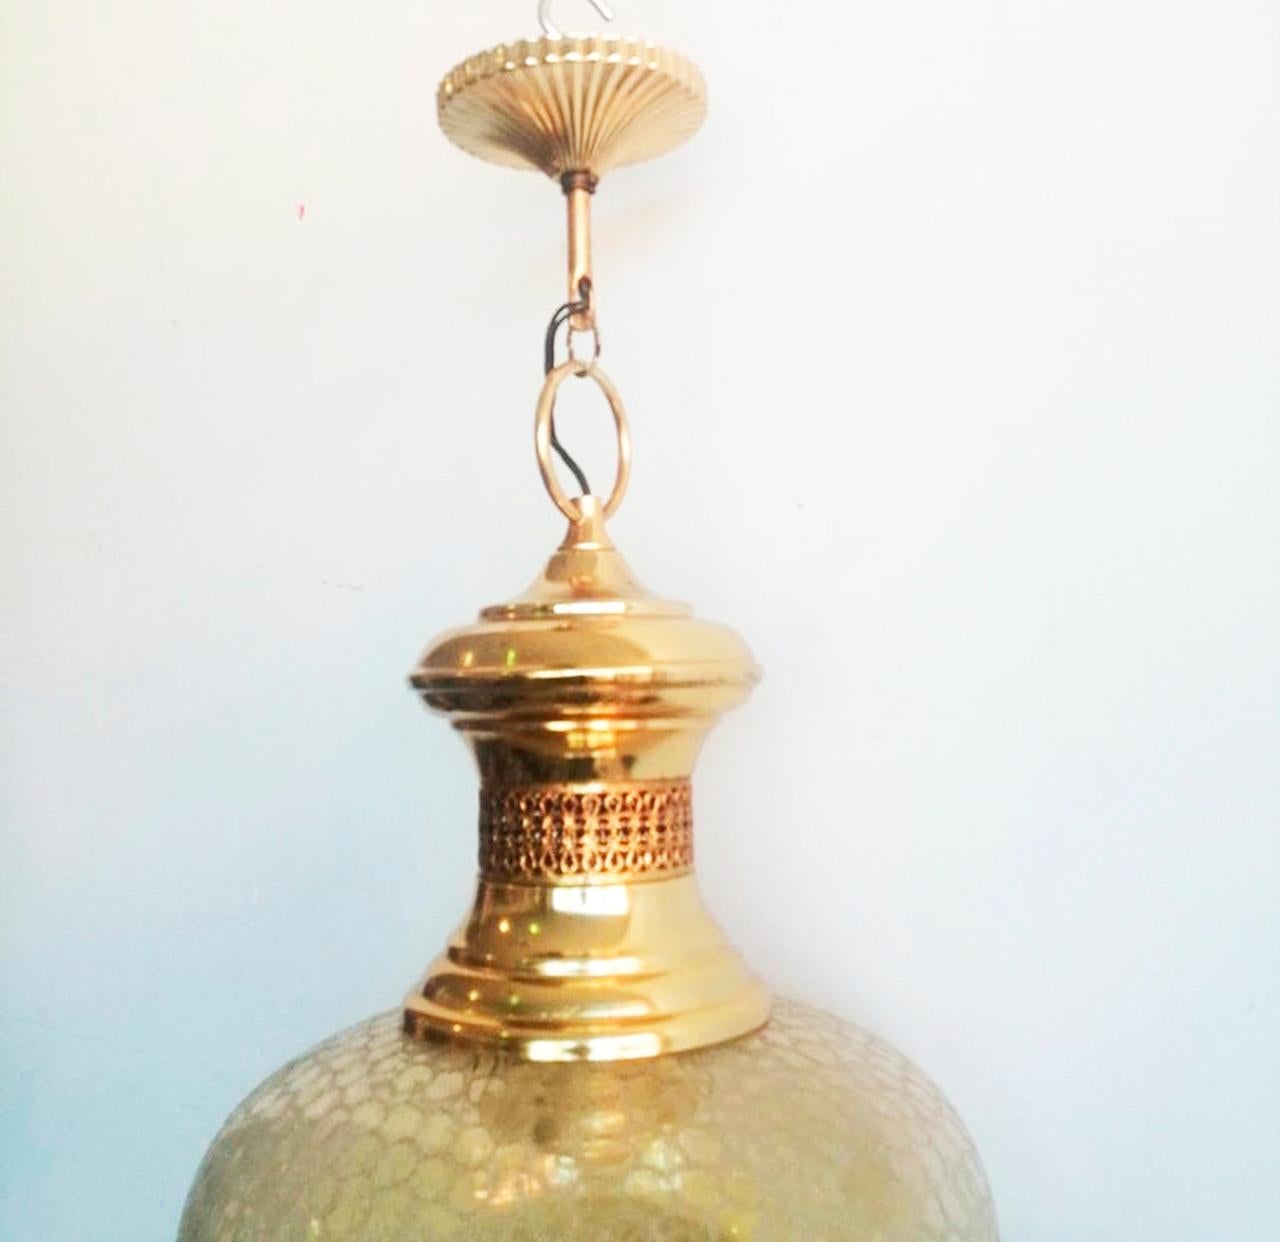 Golden Lamps Lanterns or Pendant  Gold  Brass and Glass, Spain Mid 20th Century For Sale 1